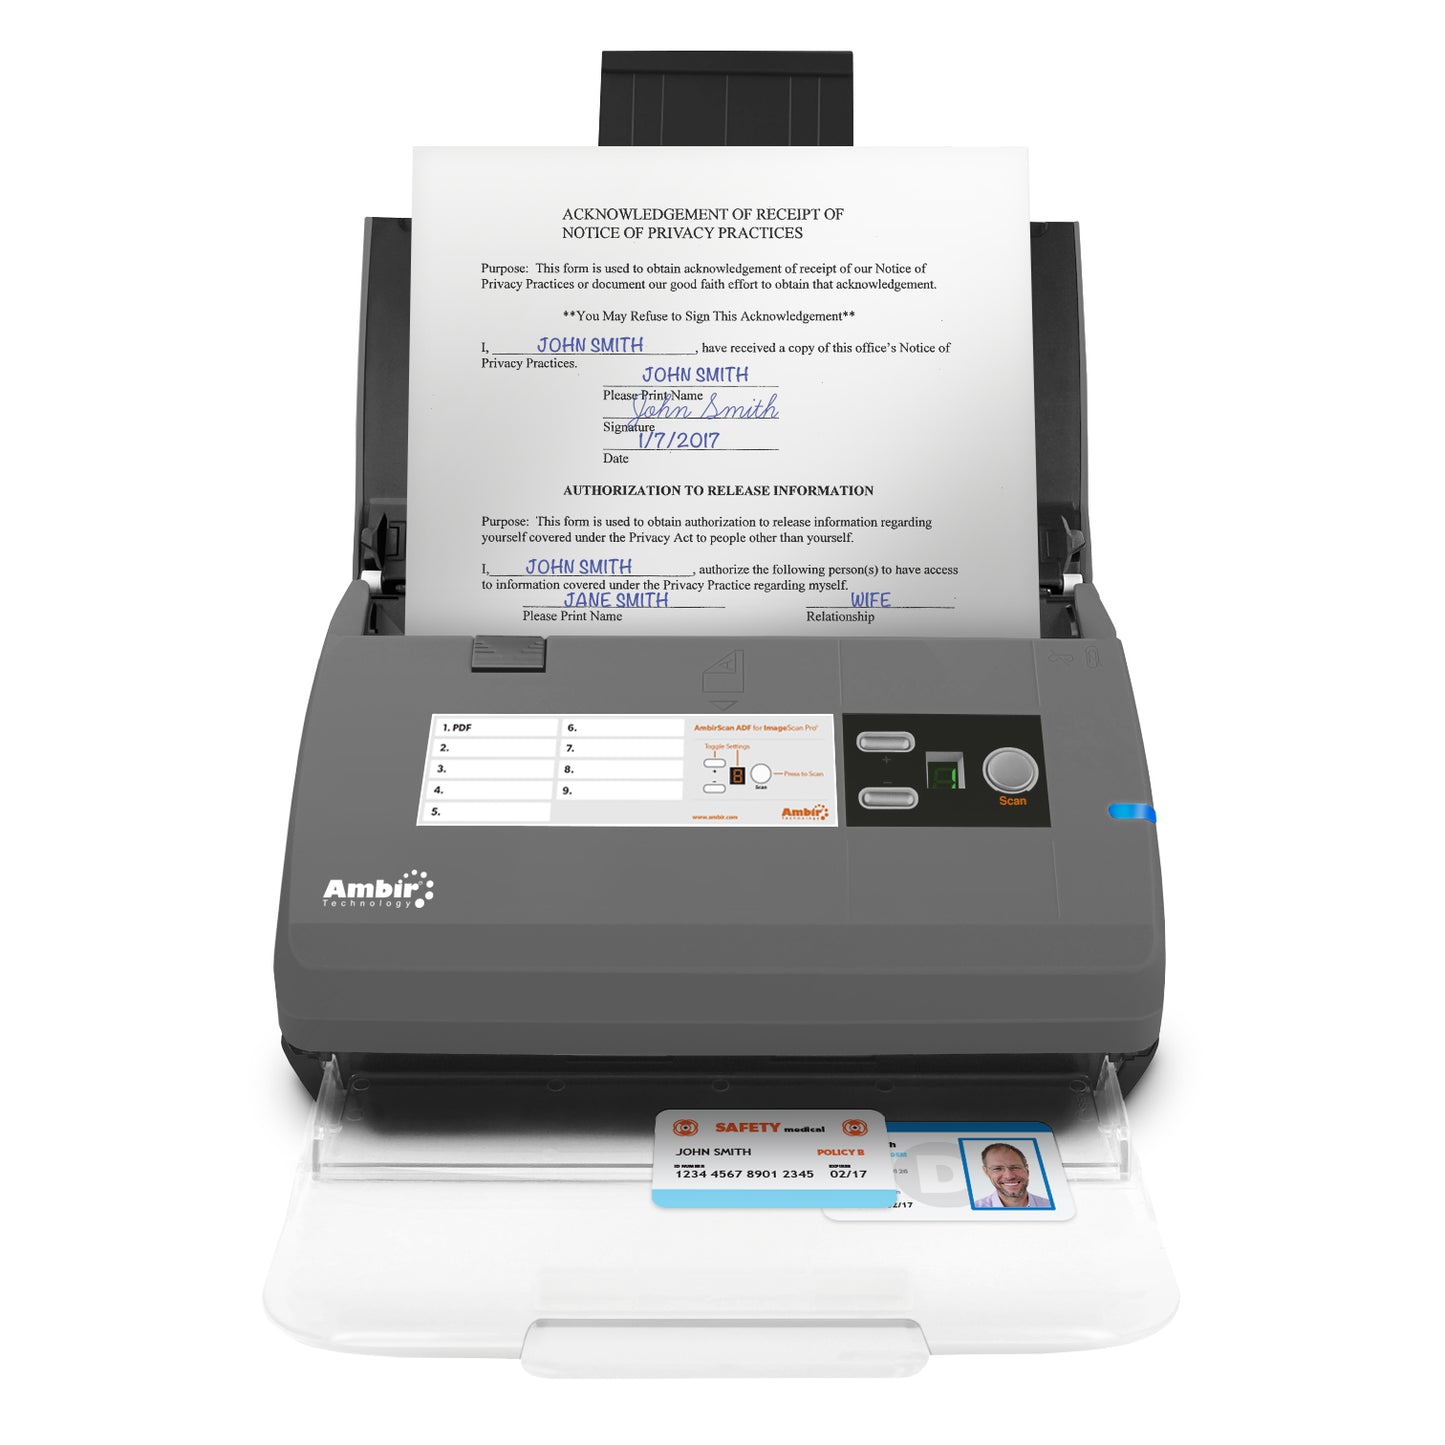 ImageScan Pro 830ix with AmbirScan ADF for etherFAX (DS830IX-EF)